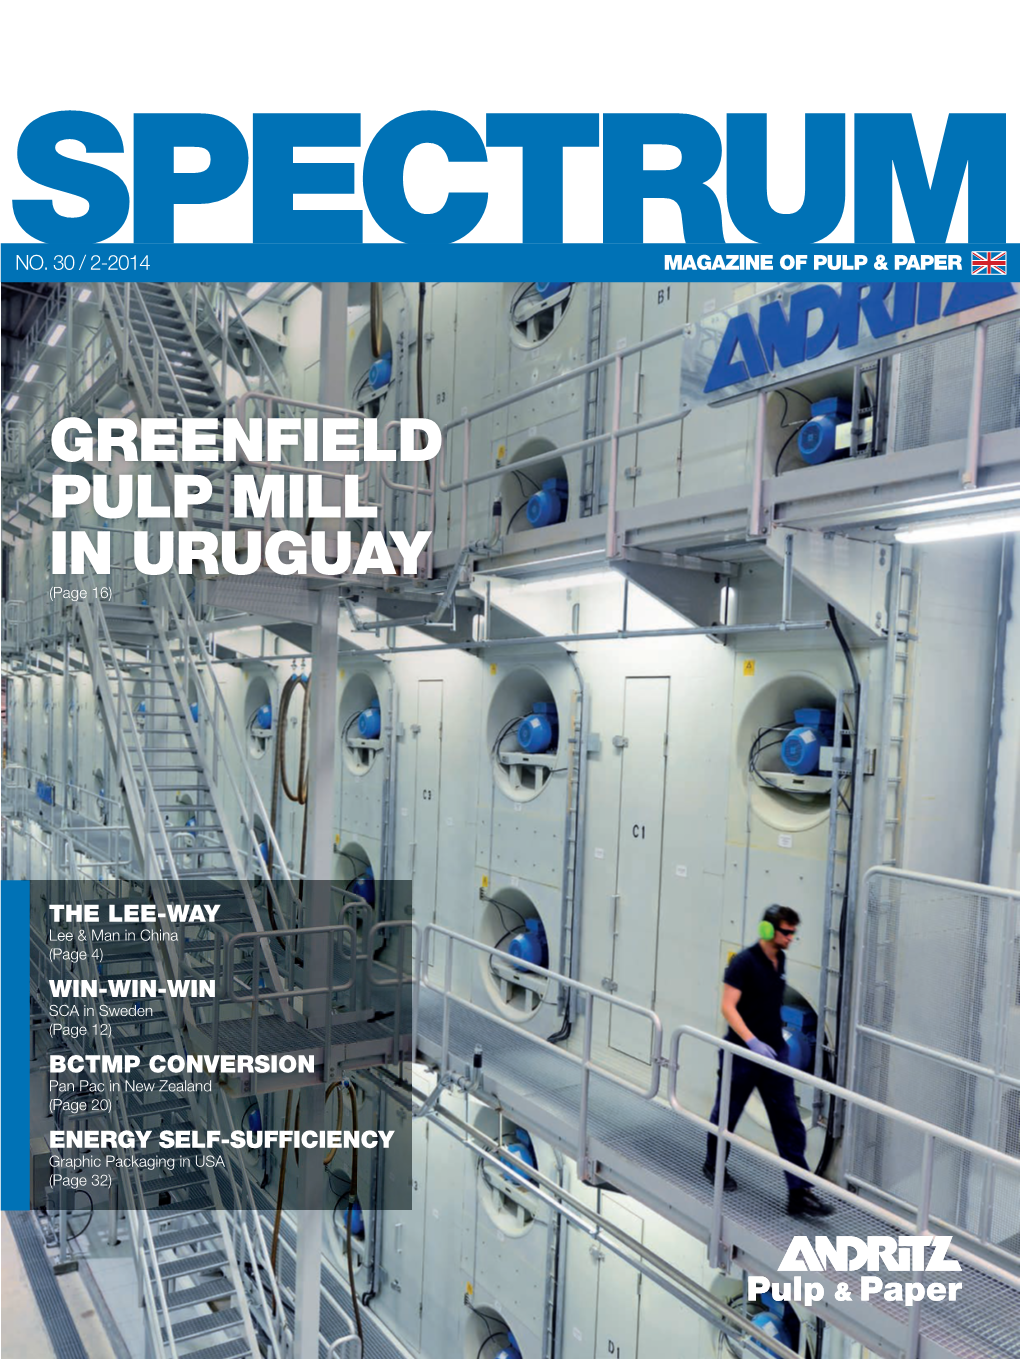 GREENFIELD PULP MILL in URUGUAY (Page 16)